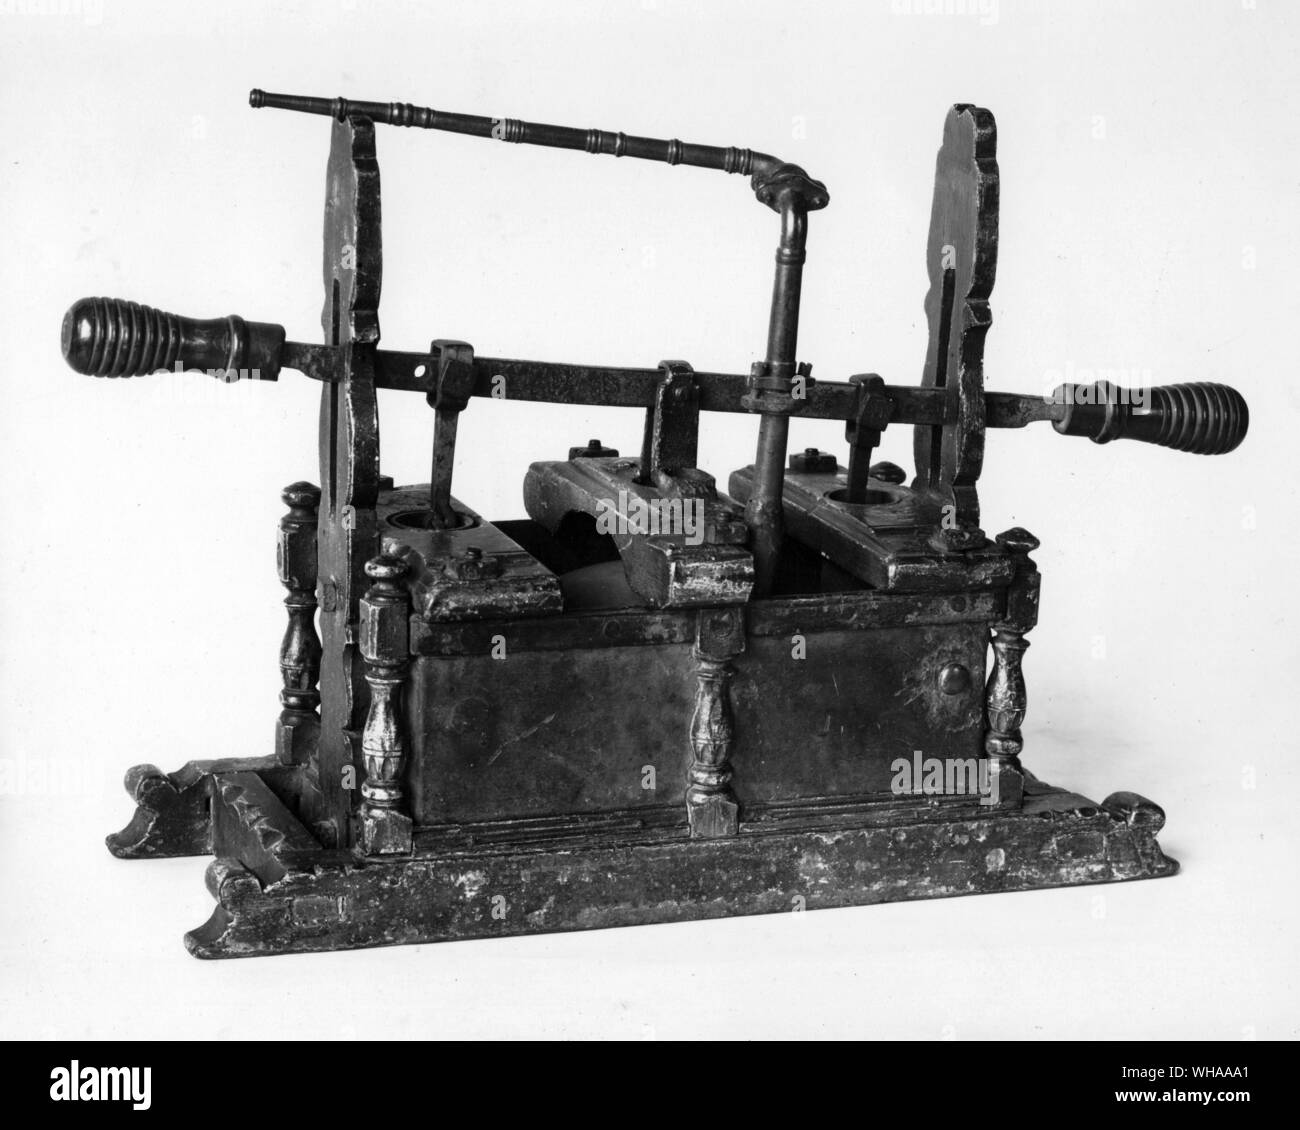 Fire Engine. Model of Manual fire engine c 1680. Stock Photo